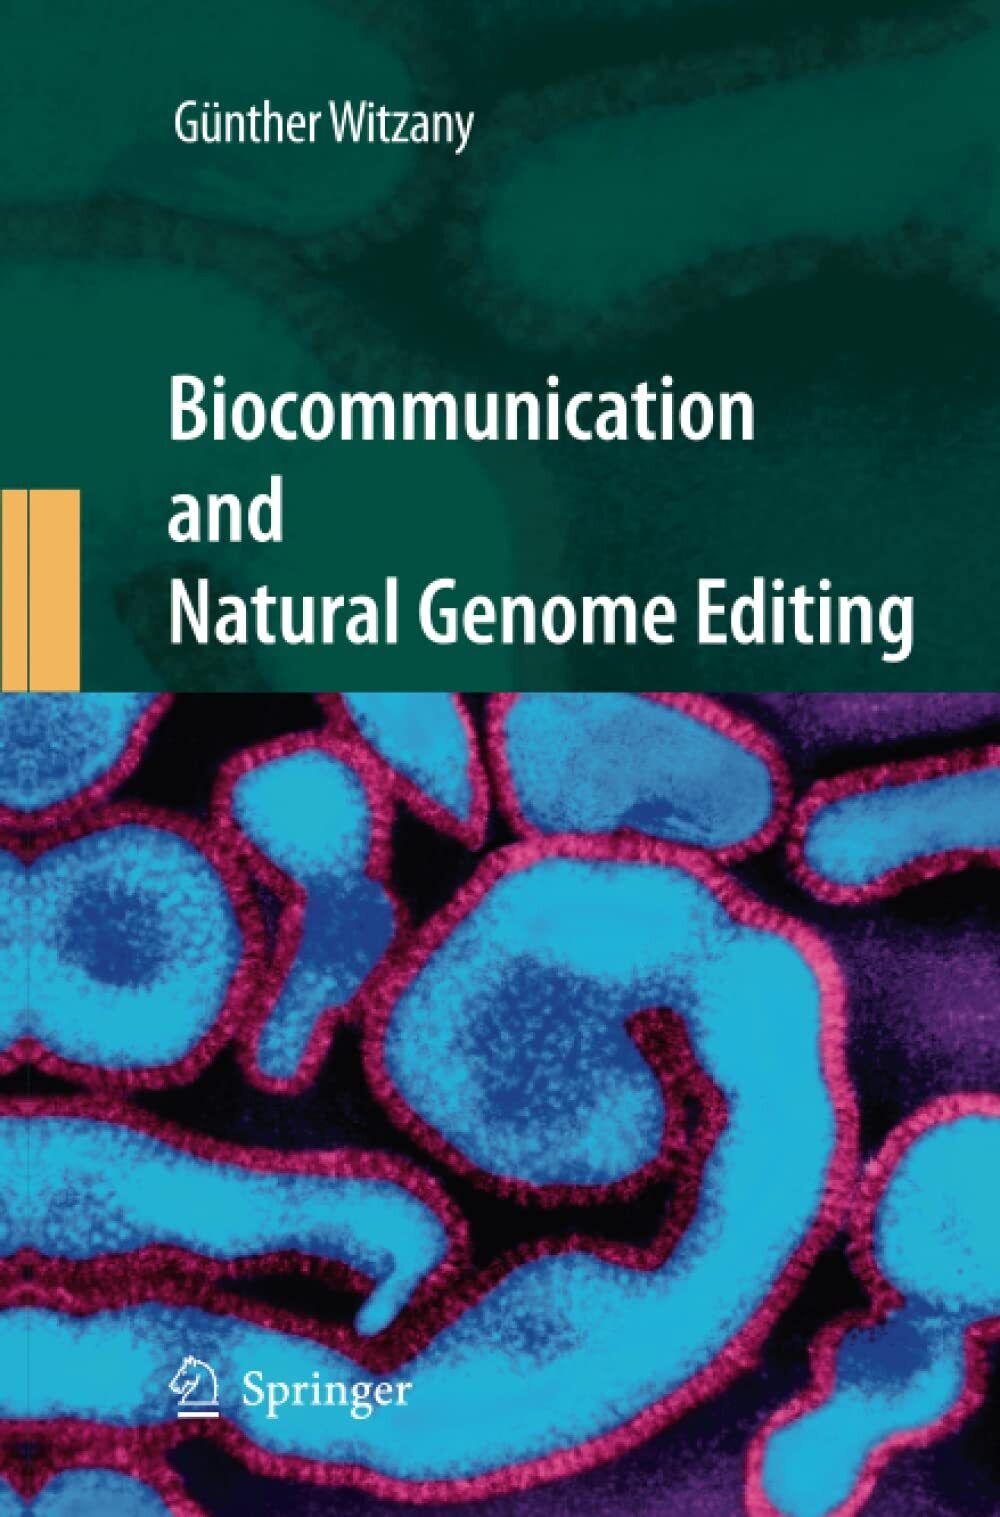 Biocommunication and Natural Genome Editing - G?nther Witzany - Springer, 2014